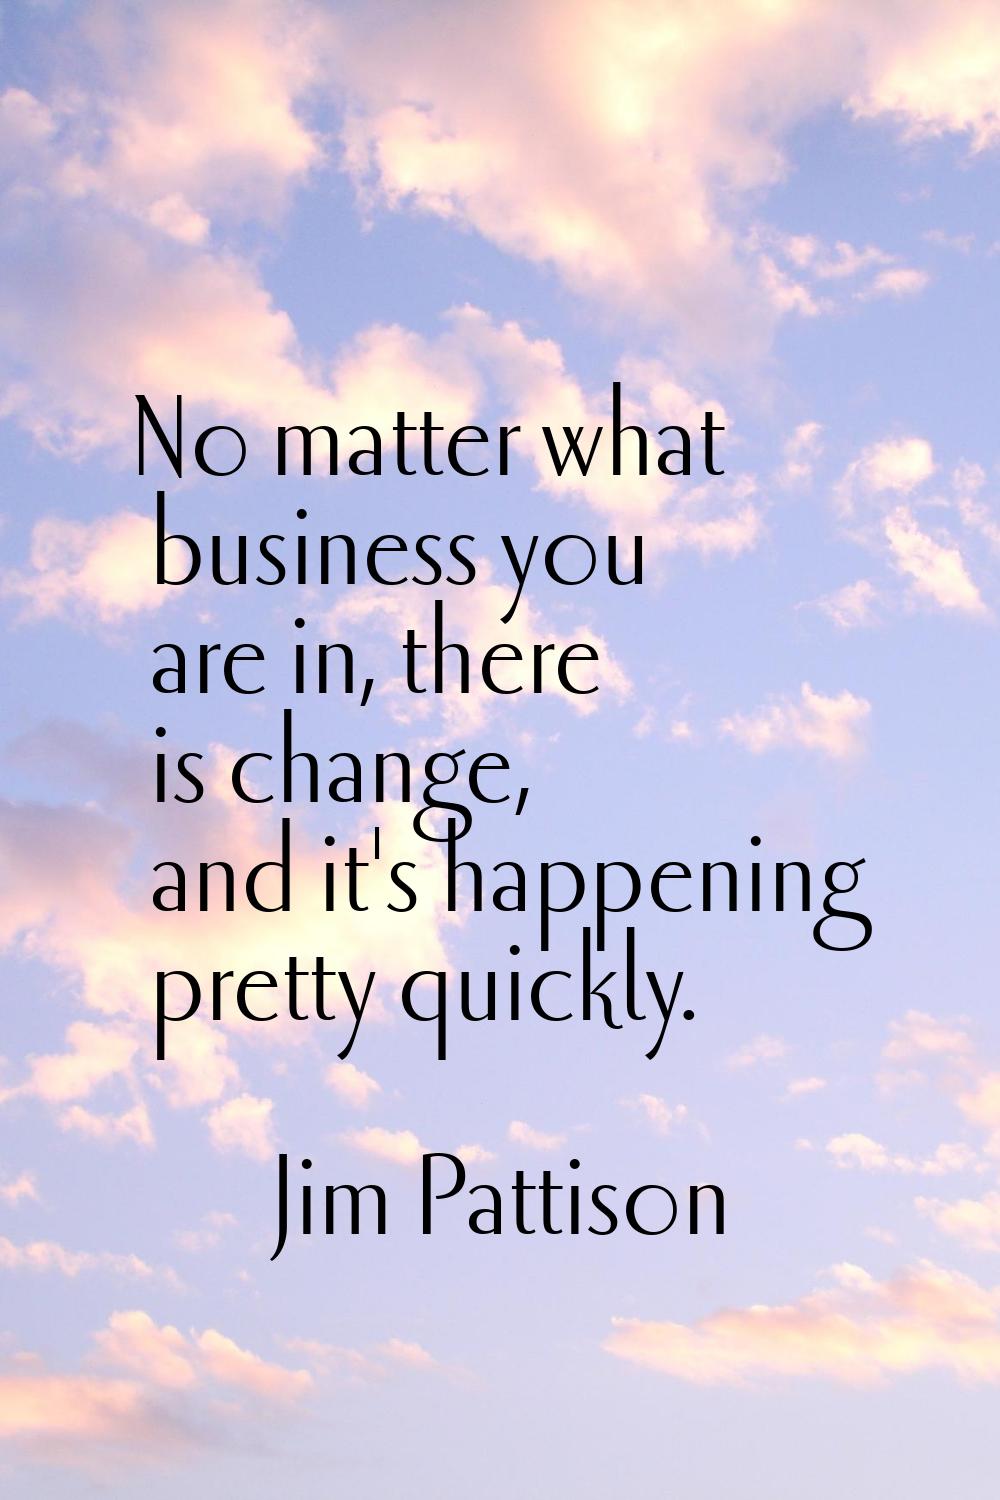 No matter what business you are in, there is change, and it's happening pretty quickly.